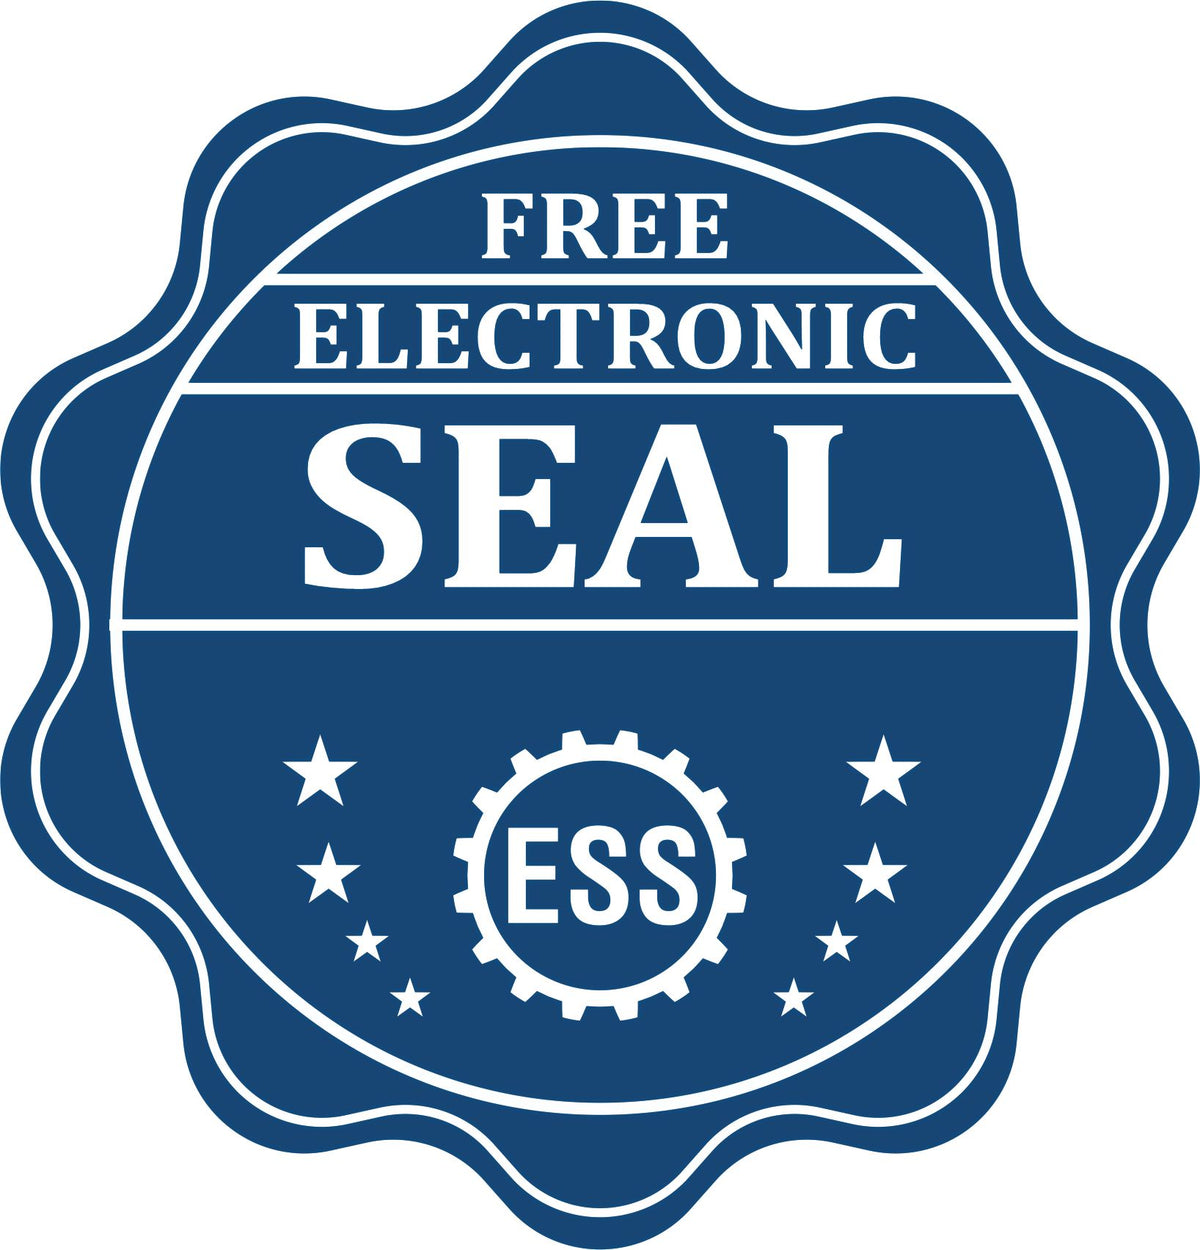 A badge showing a free electronic seal for the PSI North Carolina Notary Stamp with stars and the ESS gear on the emblem.